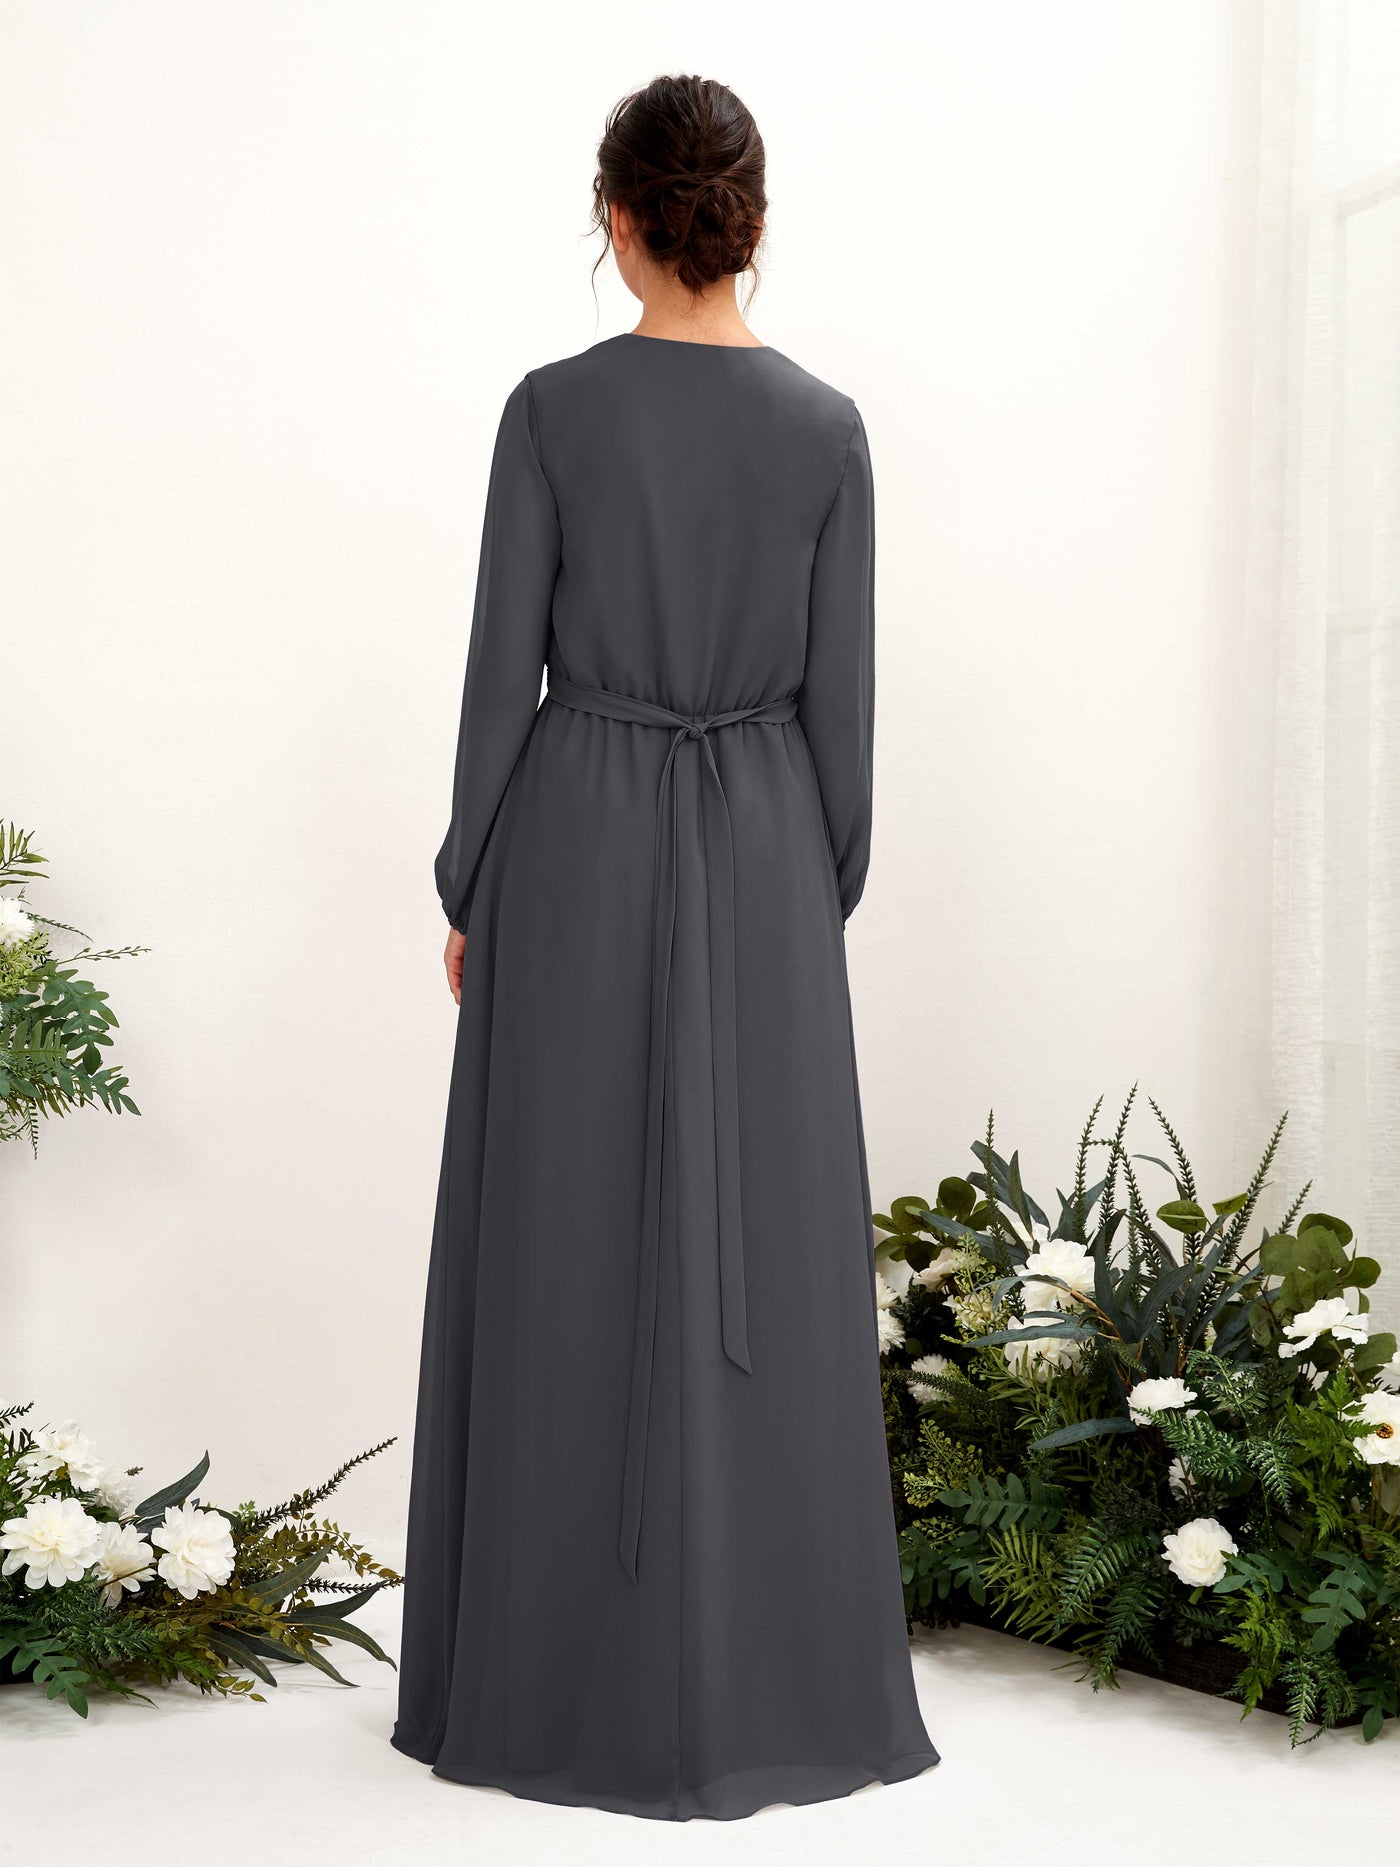 Pewter Bridesmaid Dresses Bridesmaid Dress A-line Chiffon V-neck Full Length Long Sleeves Wedding Party Dress (81223238)#color_pewter